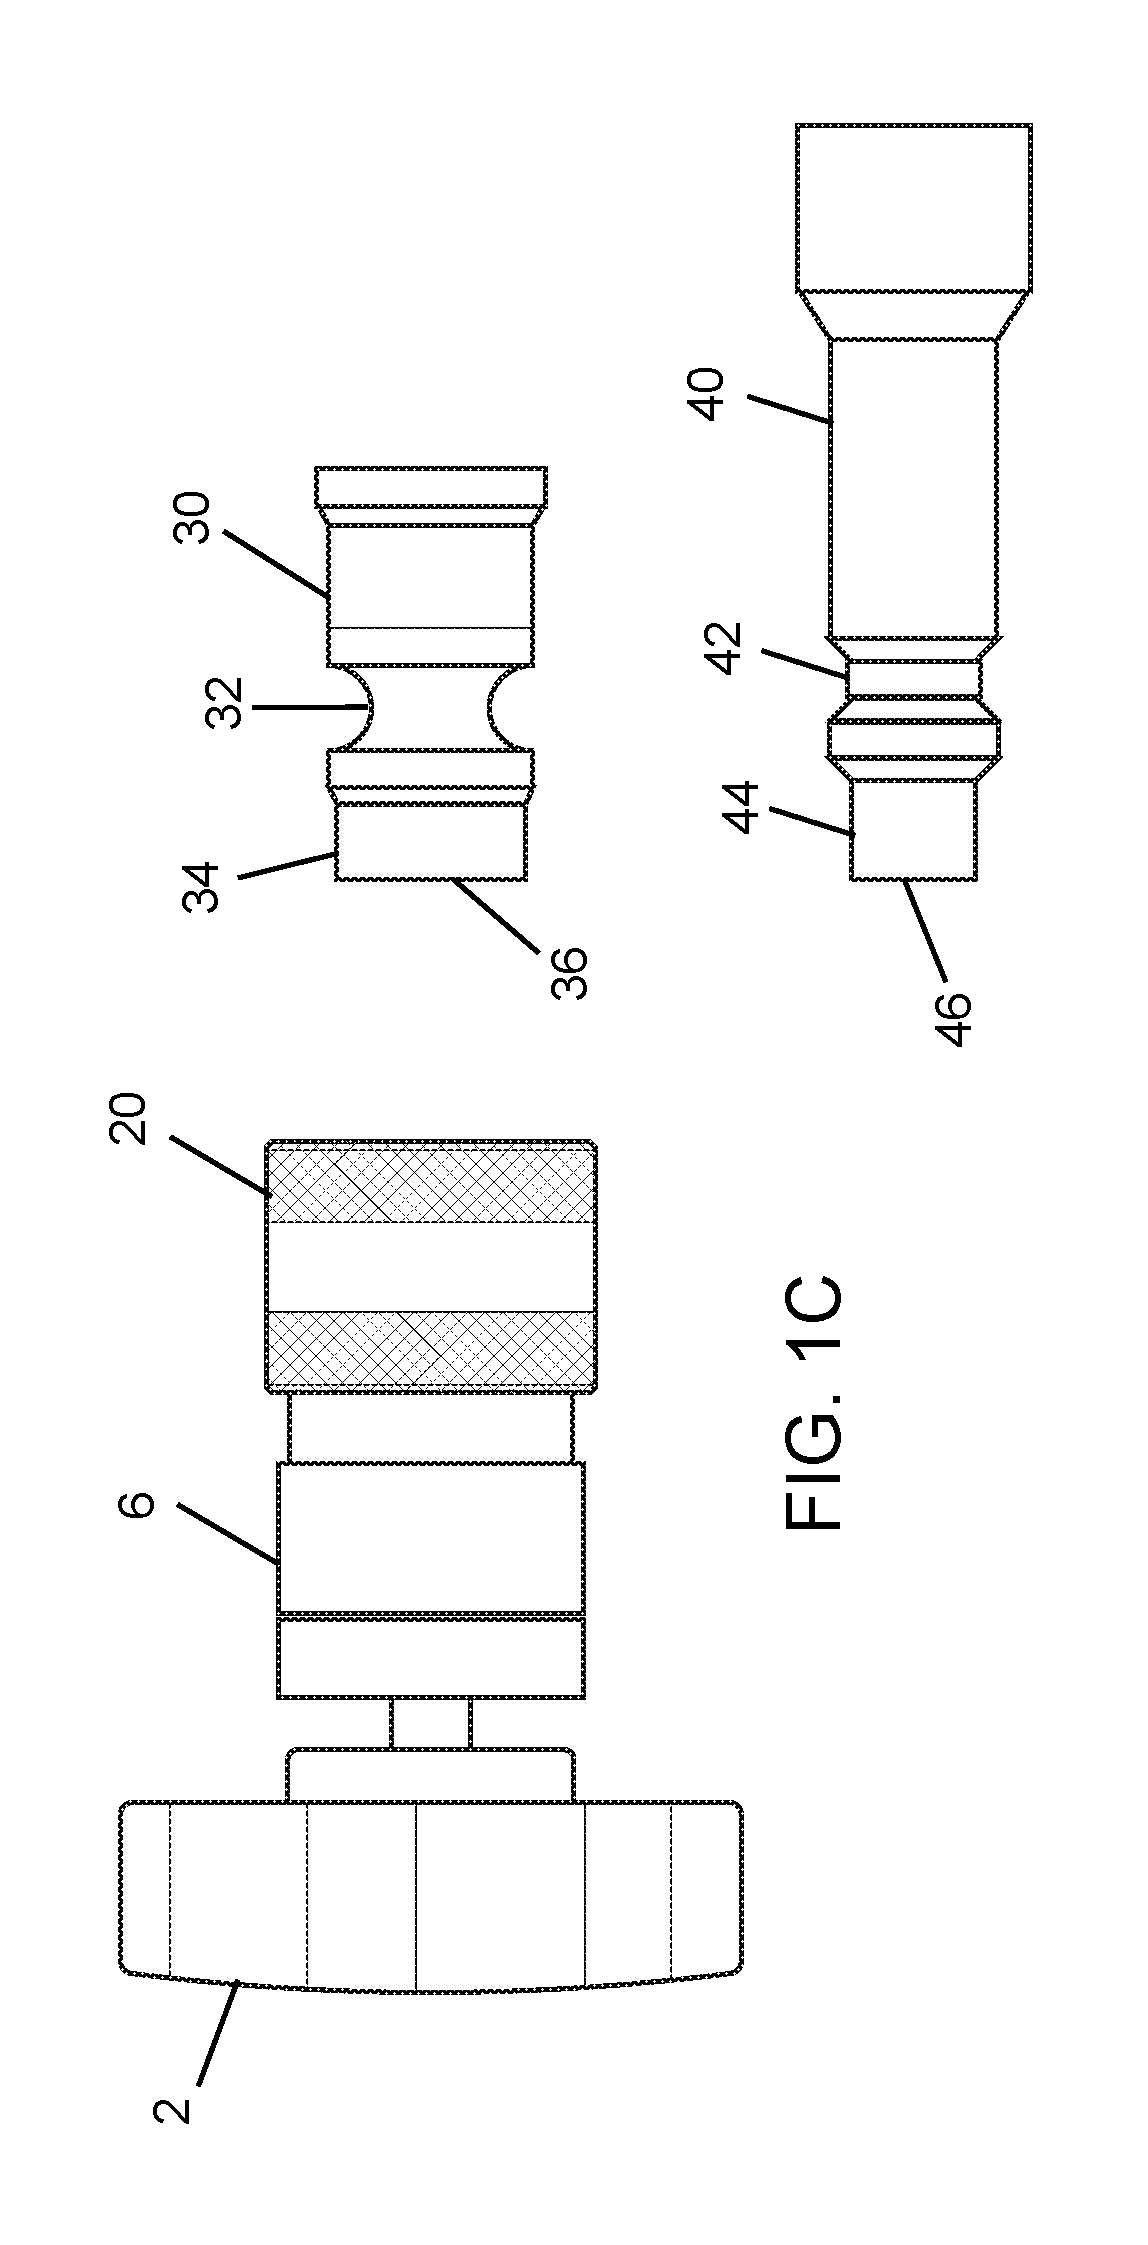 Device for preventing refrigerant leaks in air conditioning system service ports